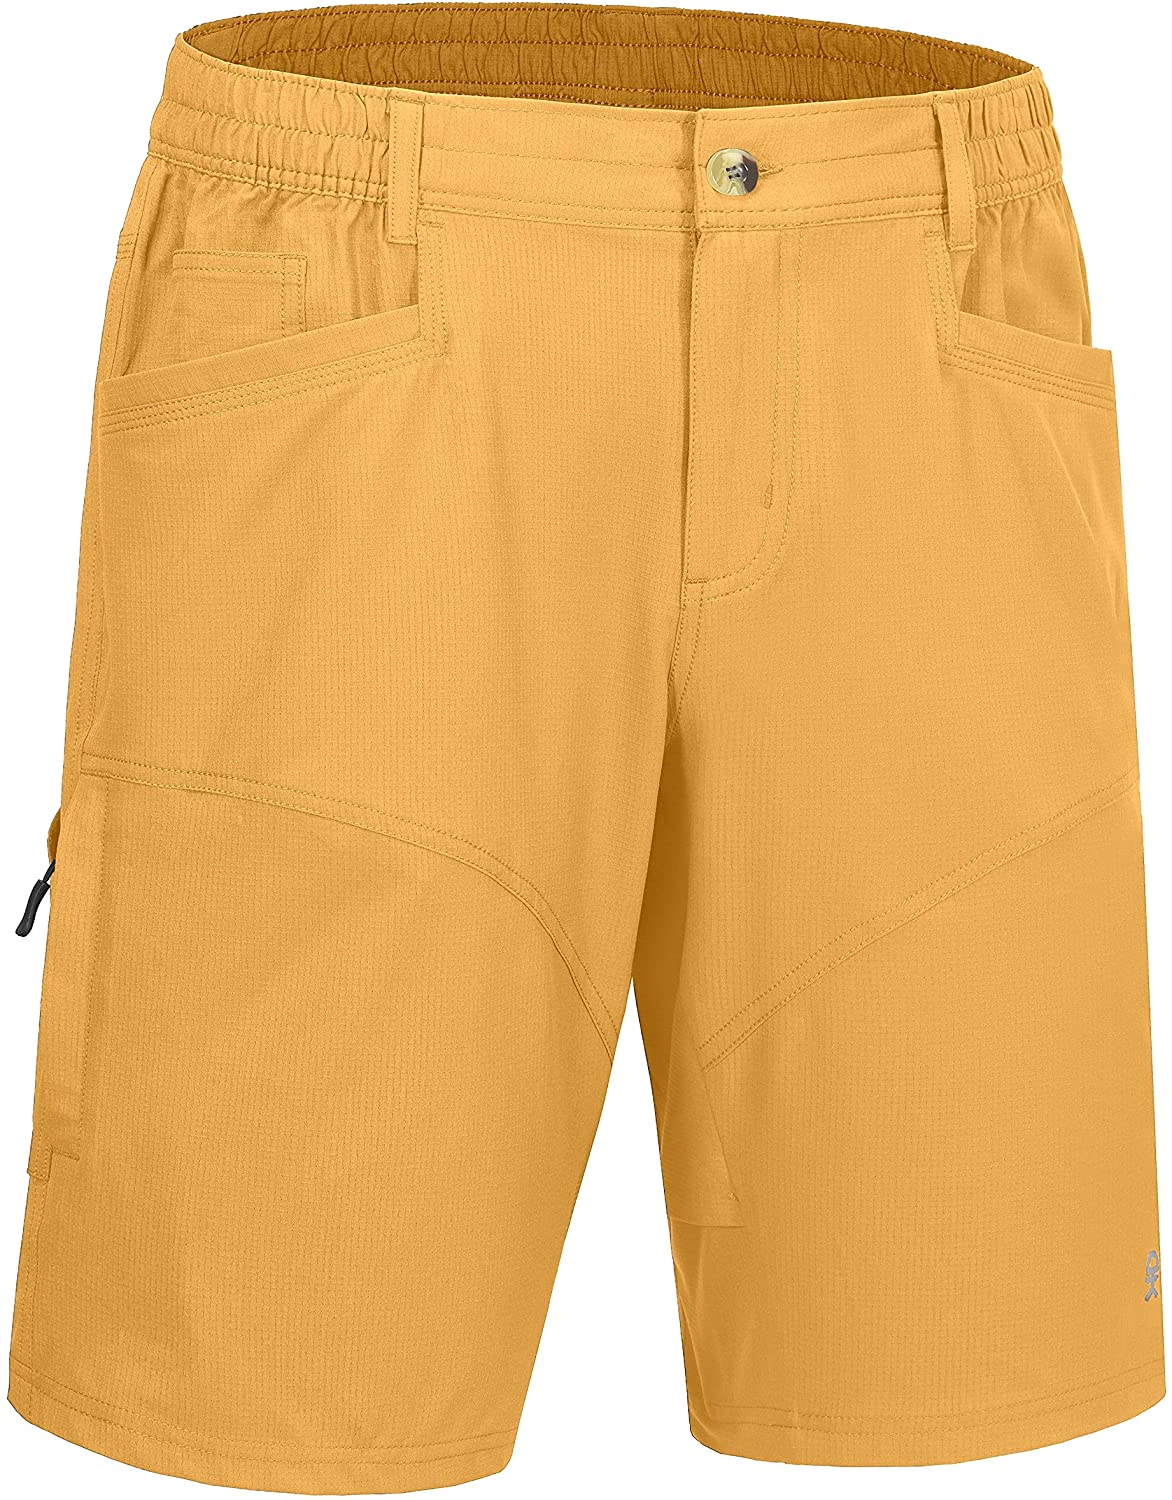 Little Donkey Andy Men's Quick Dry Shorts for Hiking Walking Work,  Multi-Pockets